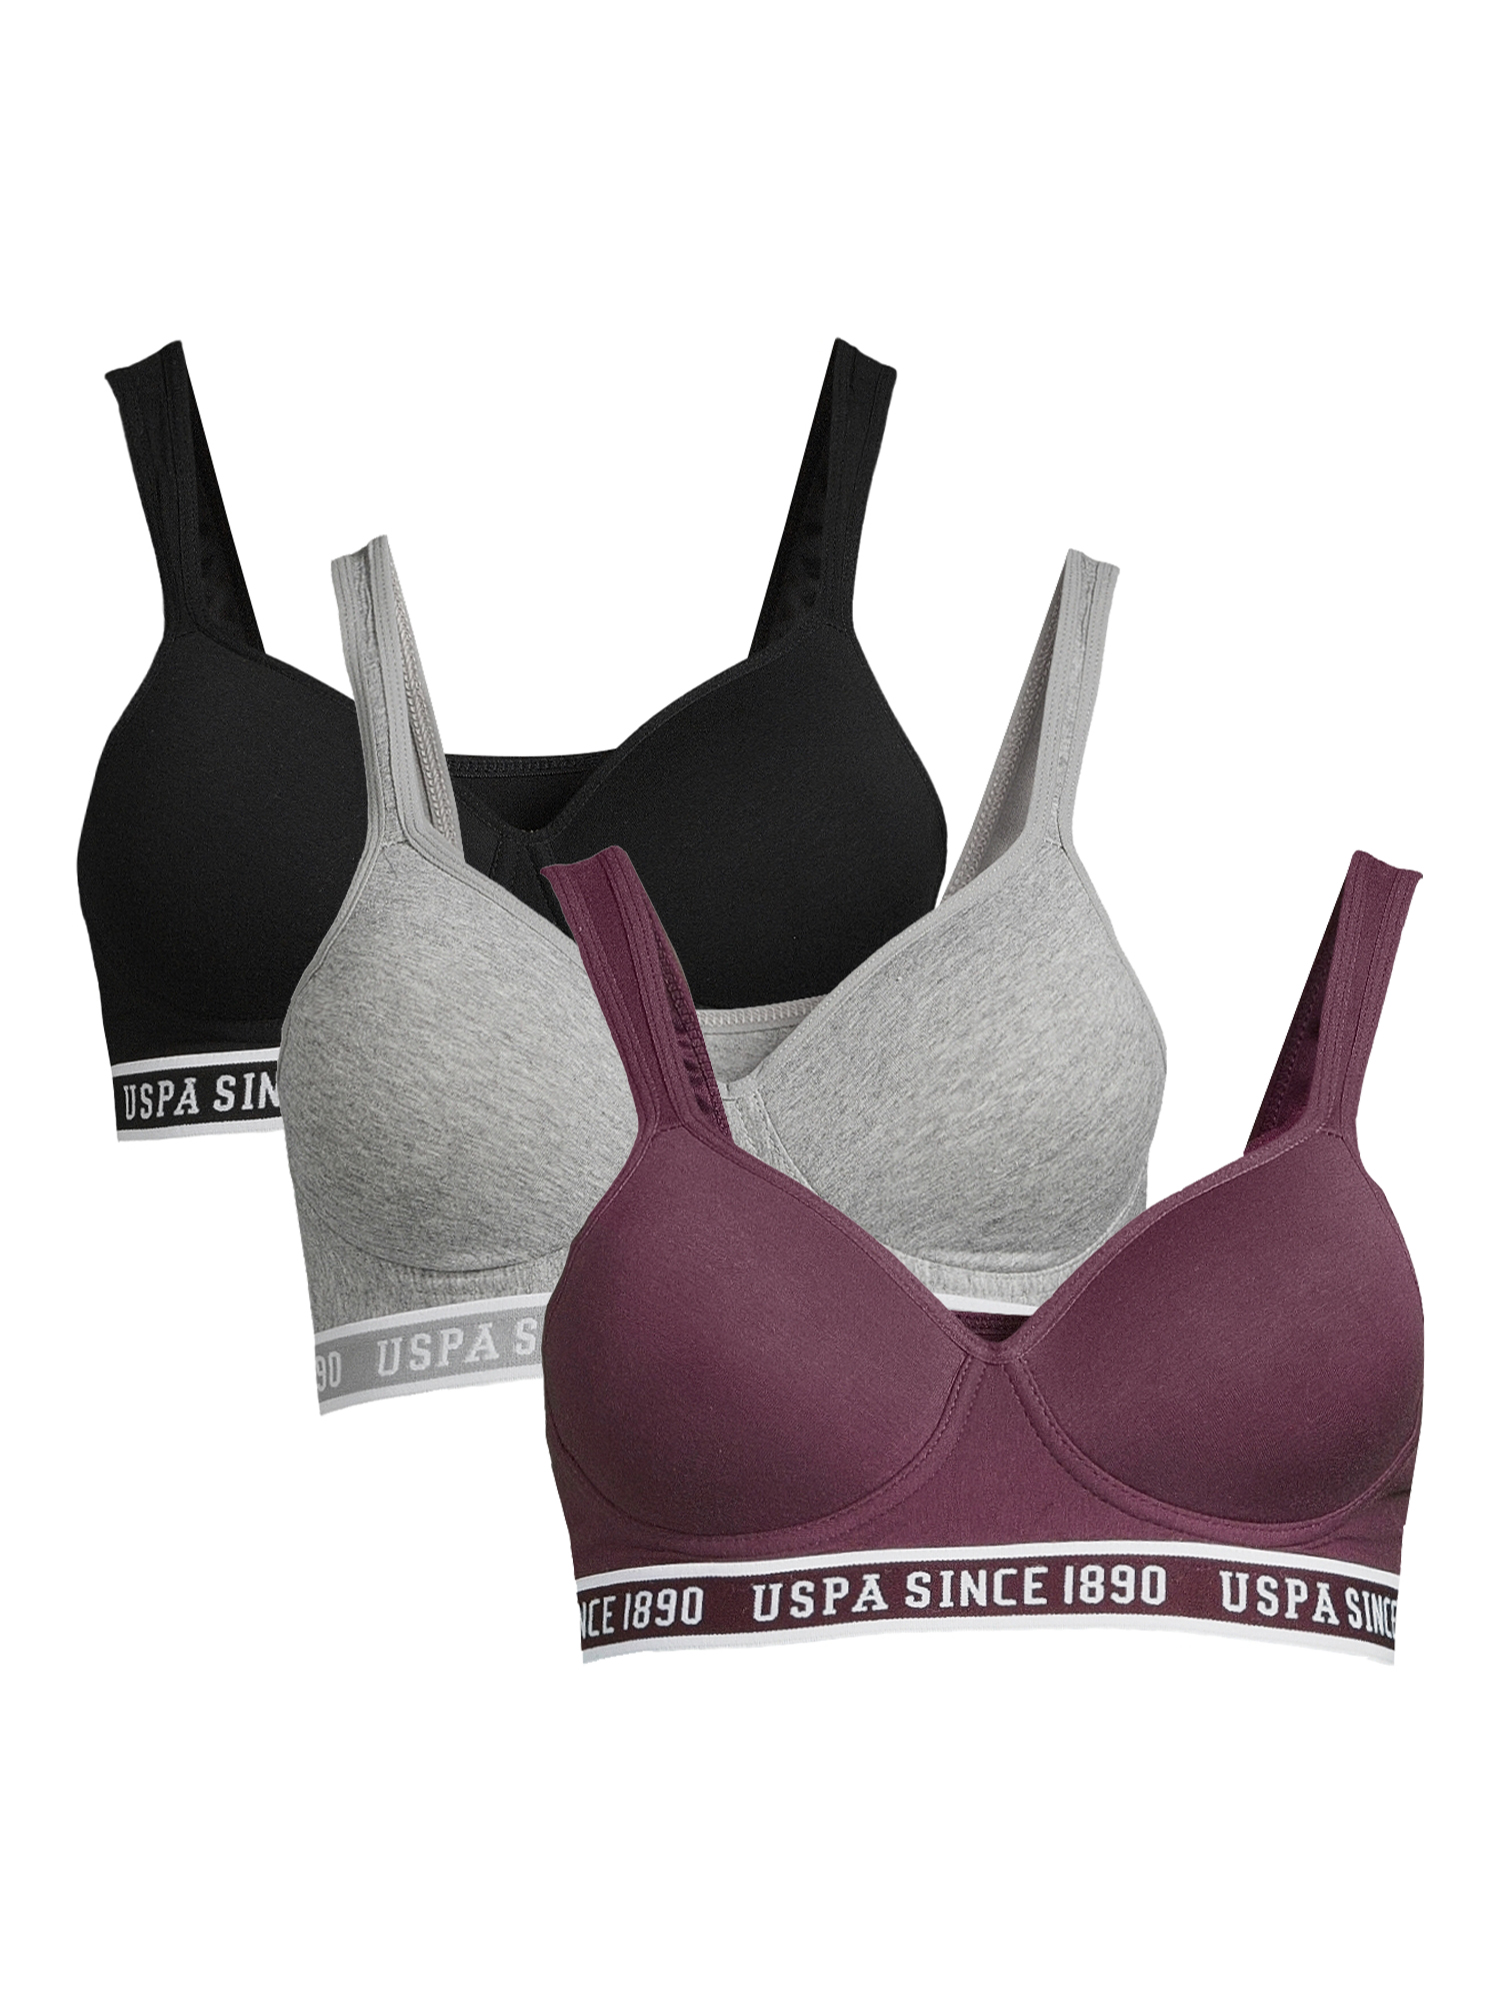 U.S. Polo Assn. Women's Tag-Free Sports Bra Set, 3-Pack - image 1 of 4